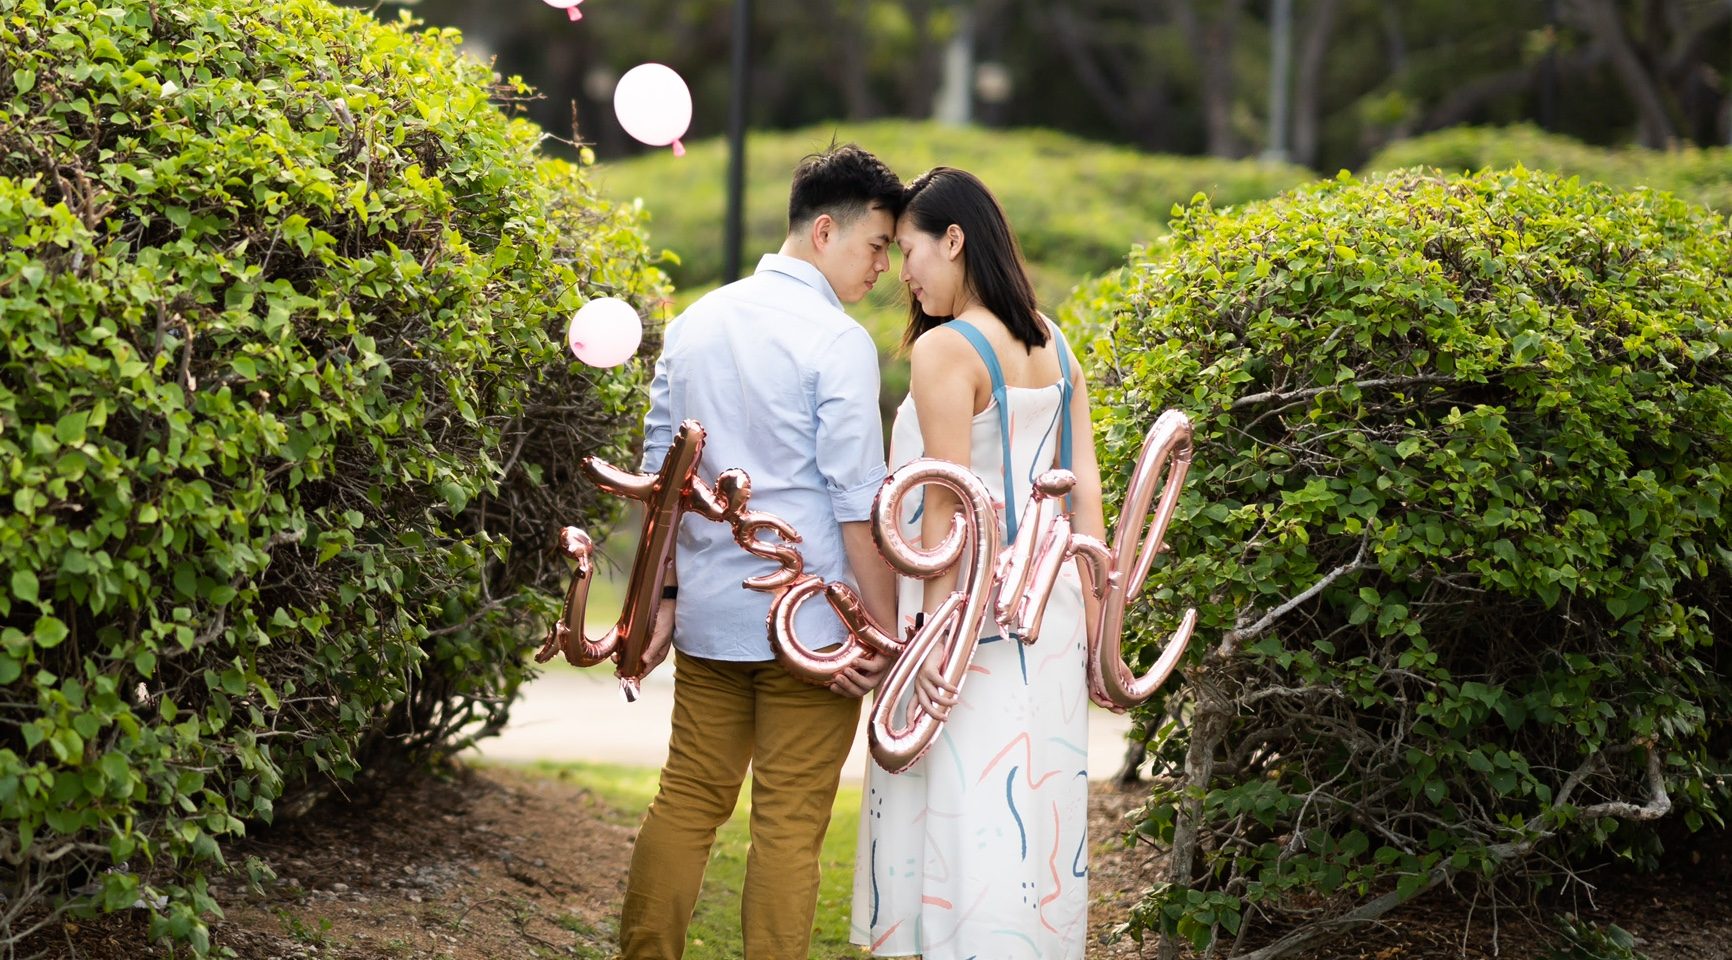 Ruth Wong and her husband, Leong Ho Wan, were grieved when their unborn baby girl, Faith, whom they had tried for four years to conceive, passed way at 26 and a half weeks. All photos courtesy of Ruth Wong.